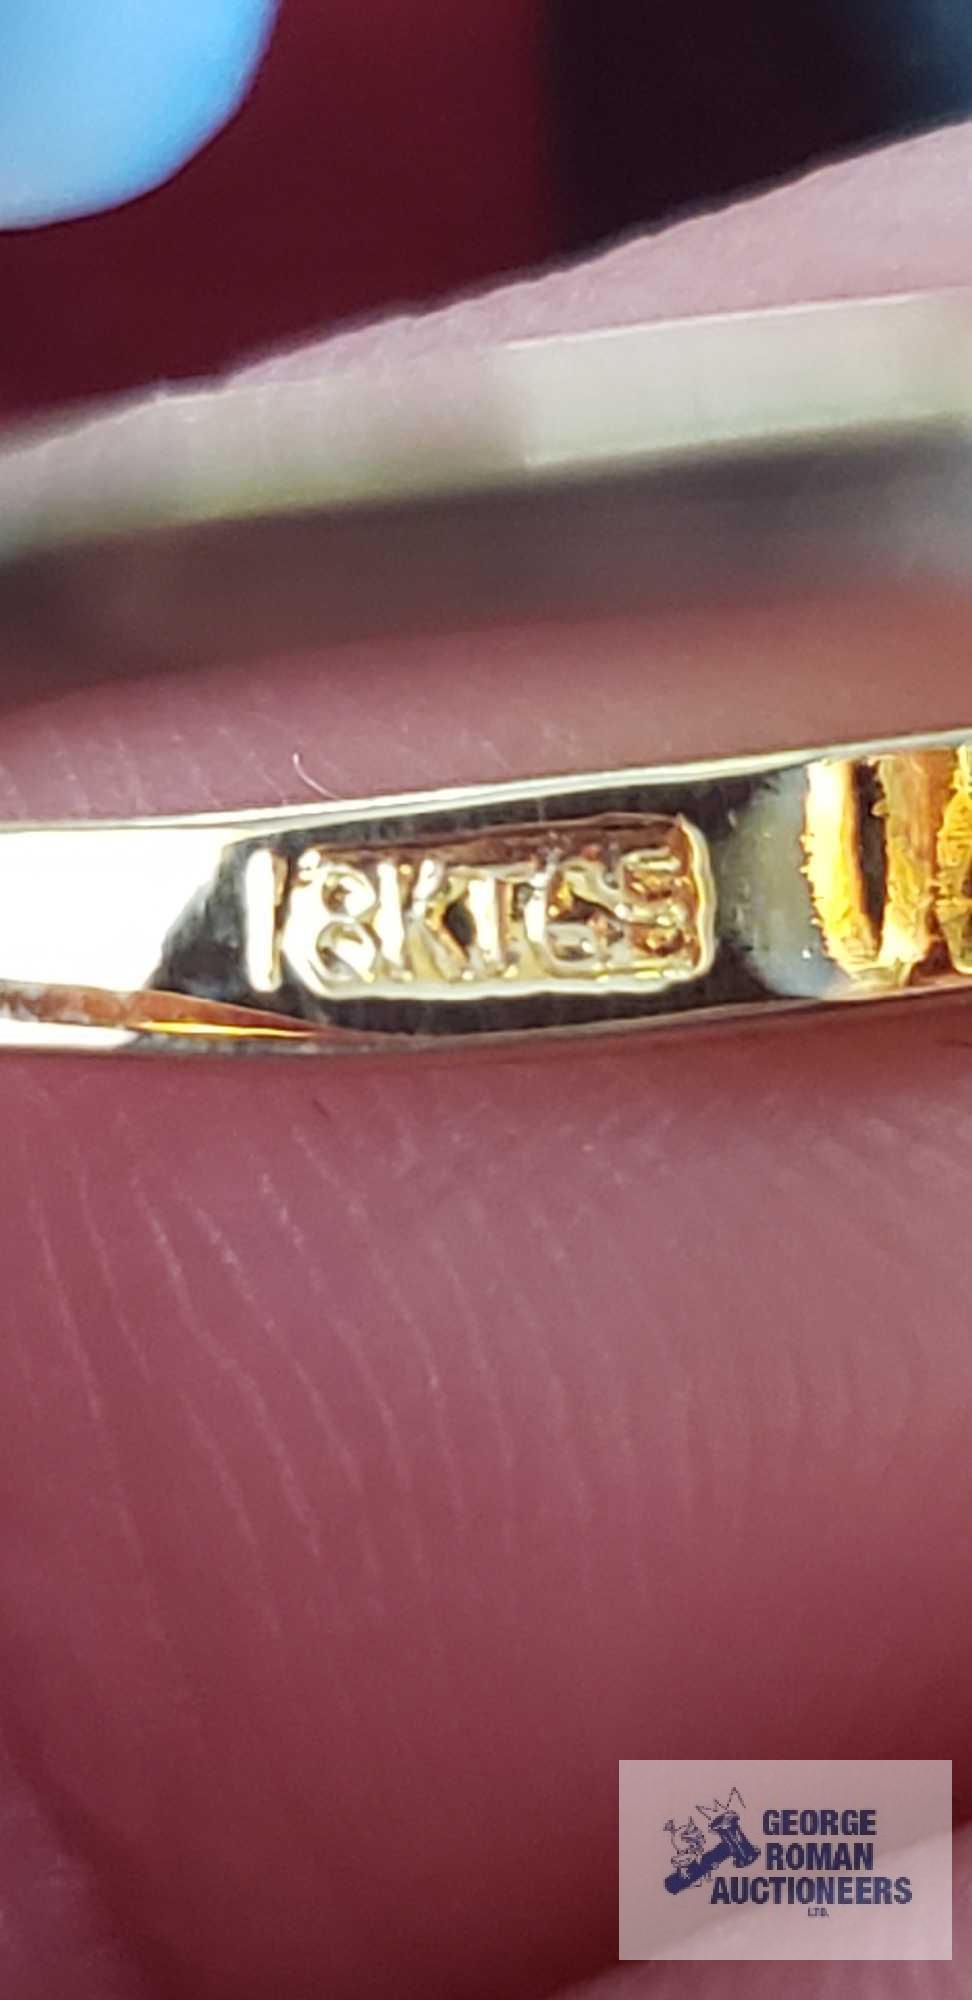 Gold colored with clear gemstone Infinity pendant, no markings found, on gold colored 120 14K GF